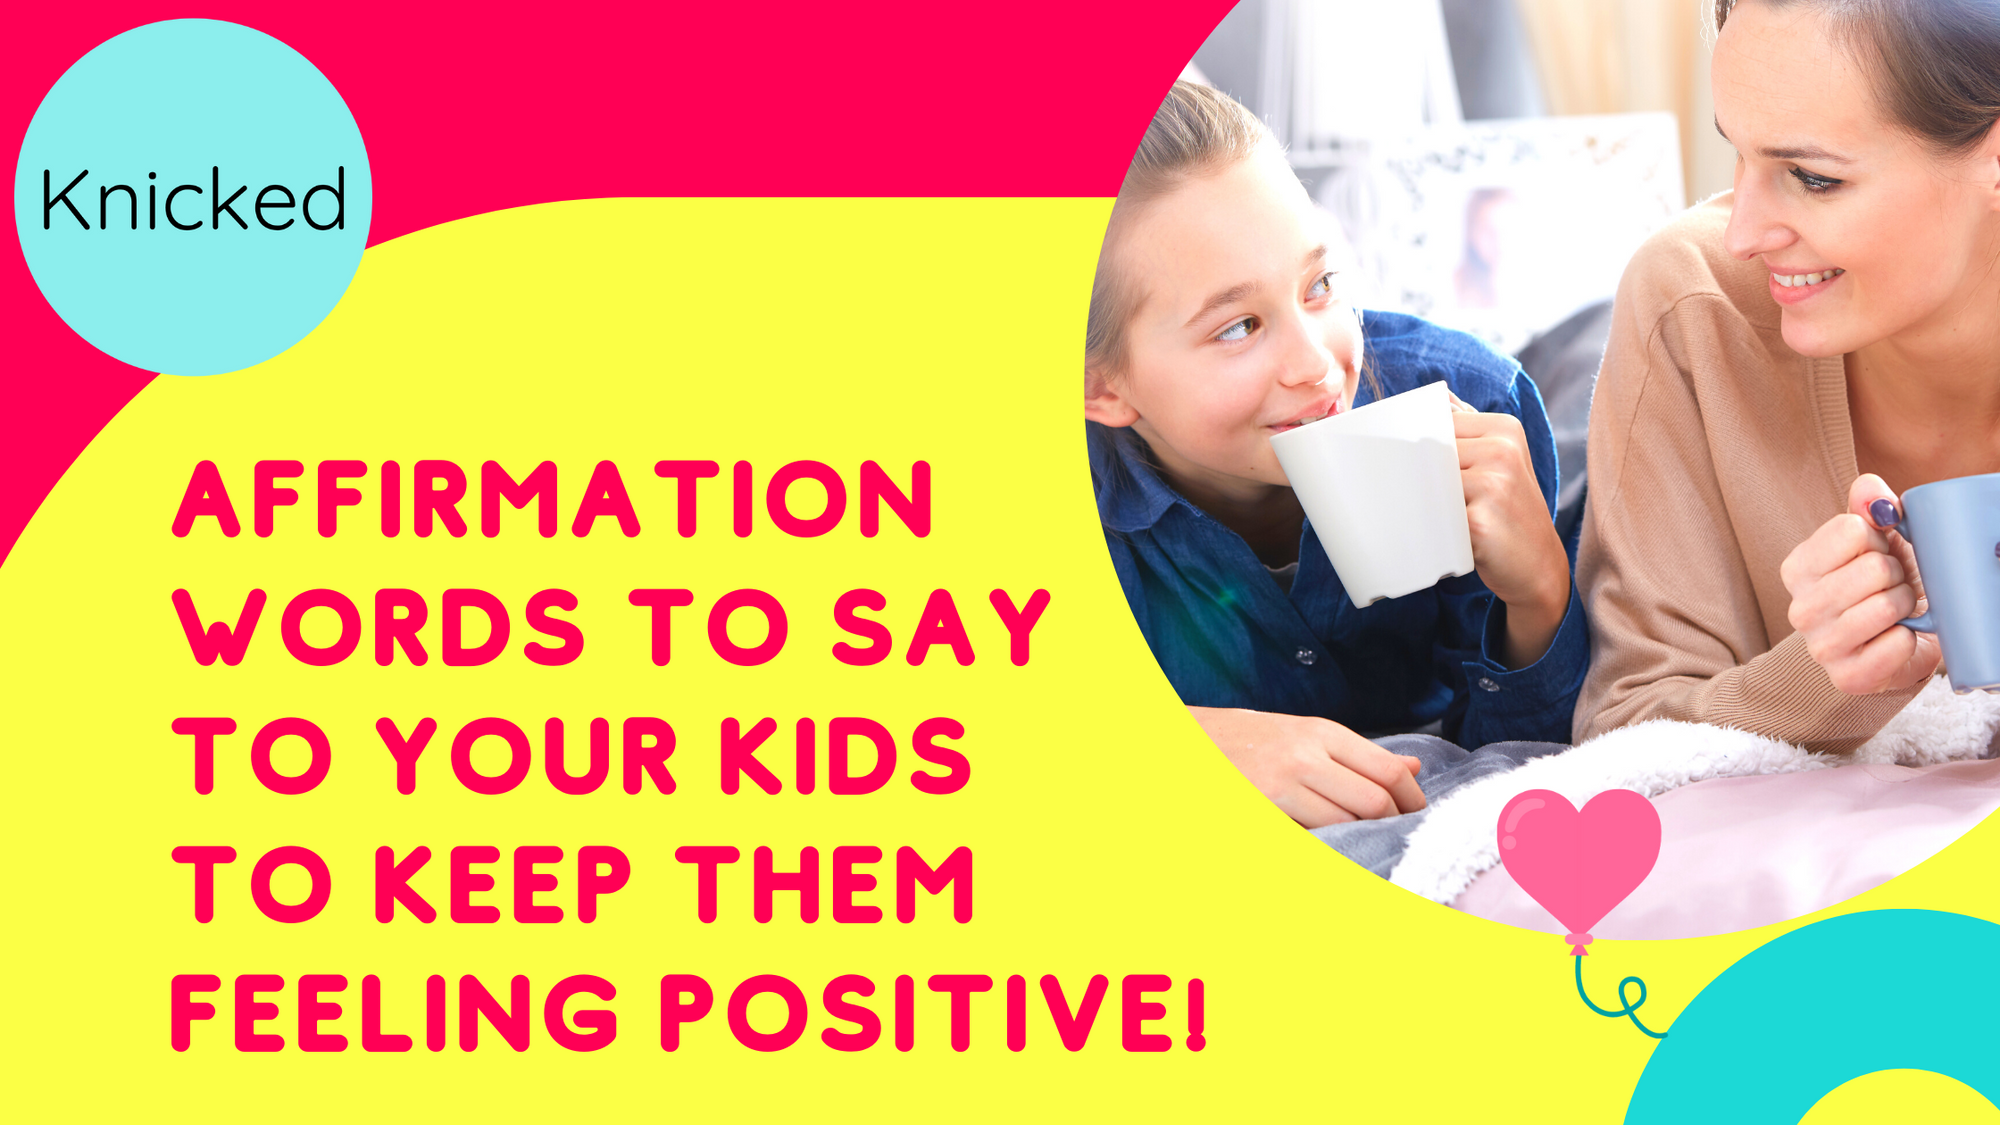 Affirmation words to say to your kids to keep them feeling positive!